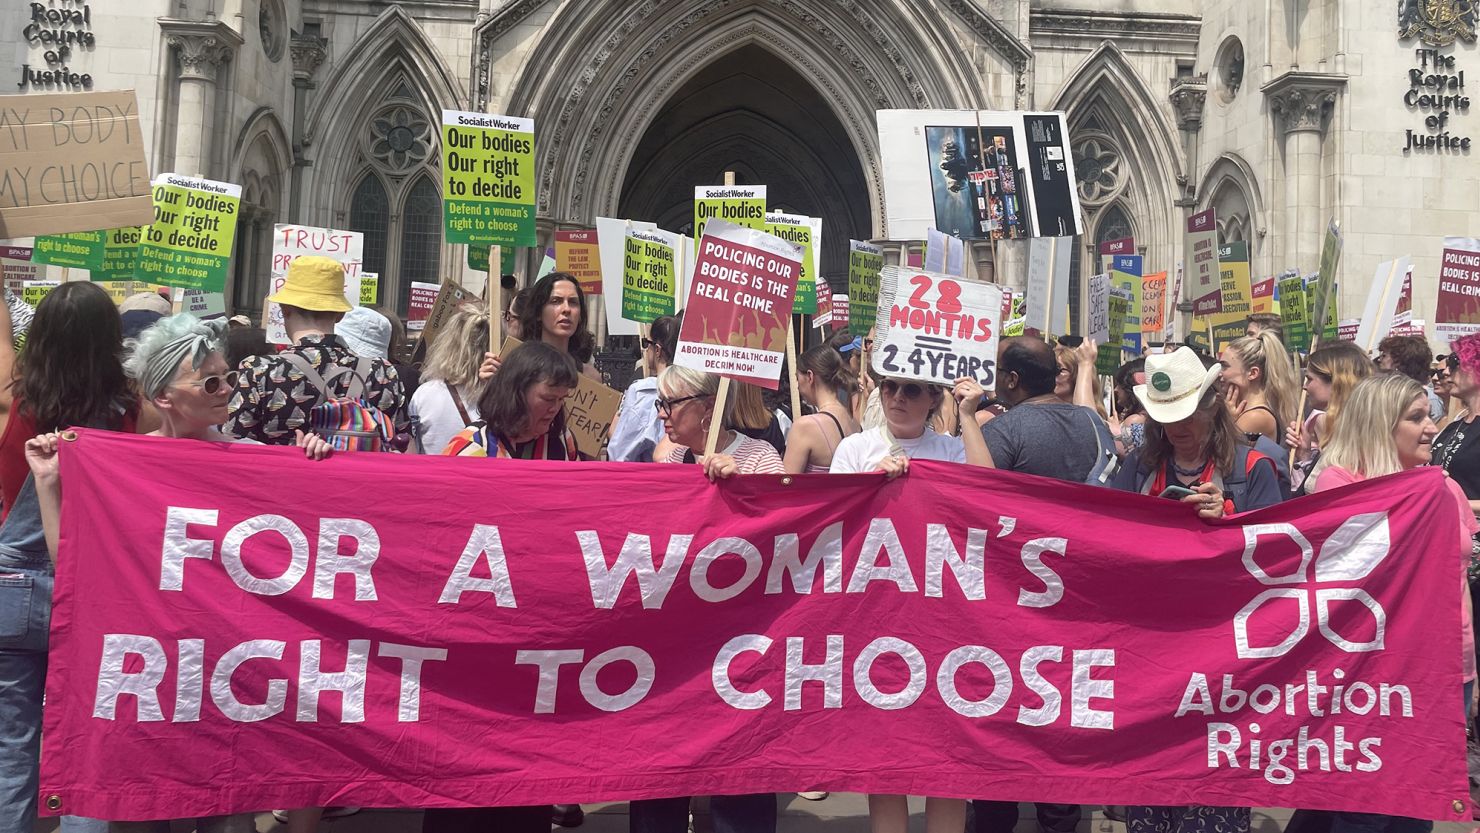 Protesters rally outside London's High Court on June 17, to advocate for the decriminalization of abortion in the UK